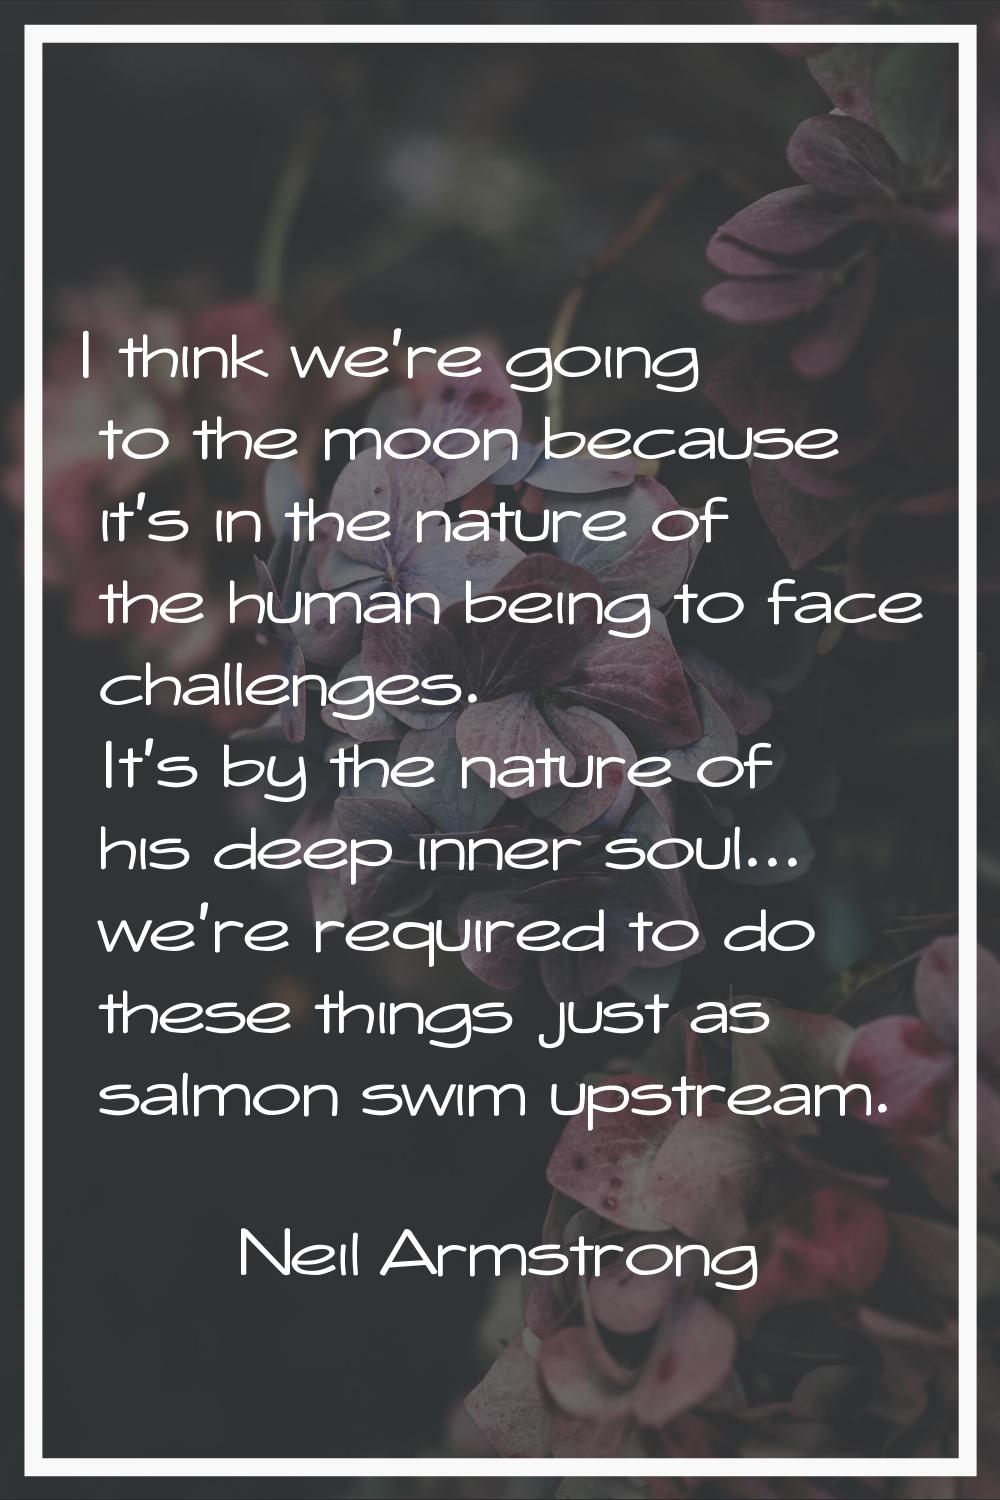 I think we're going to the moon because it's in the nature of the human being to face challenges. I